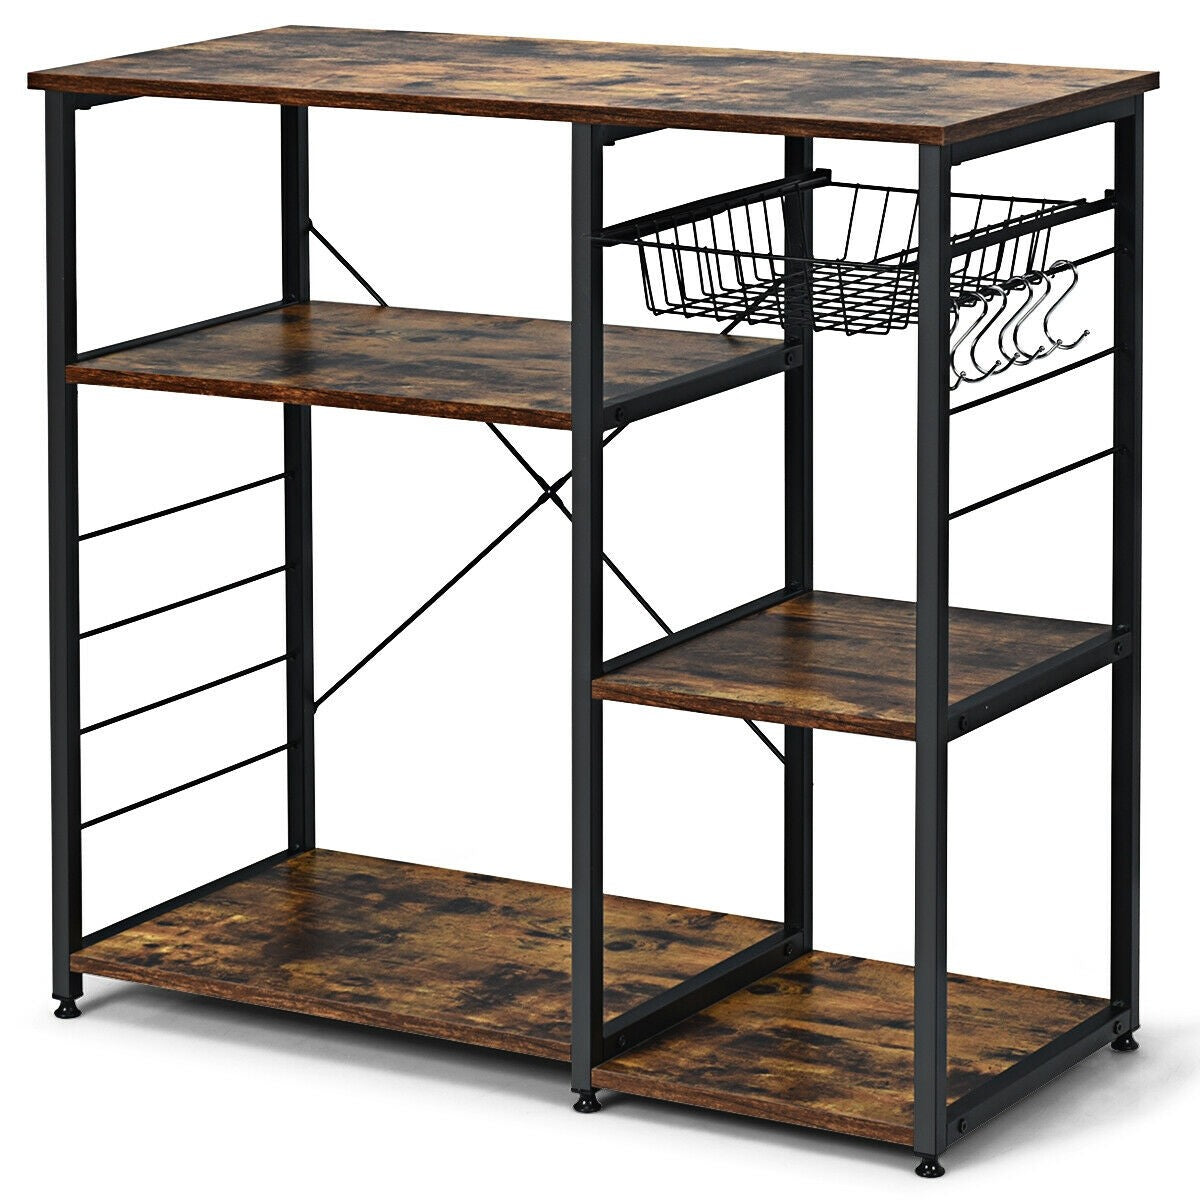 Kitchen Baker's Rack Industrial Style Microwave Oven Stand with Wire Basket